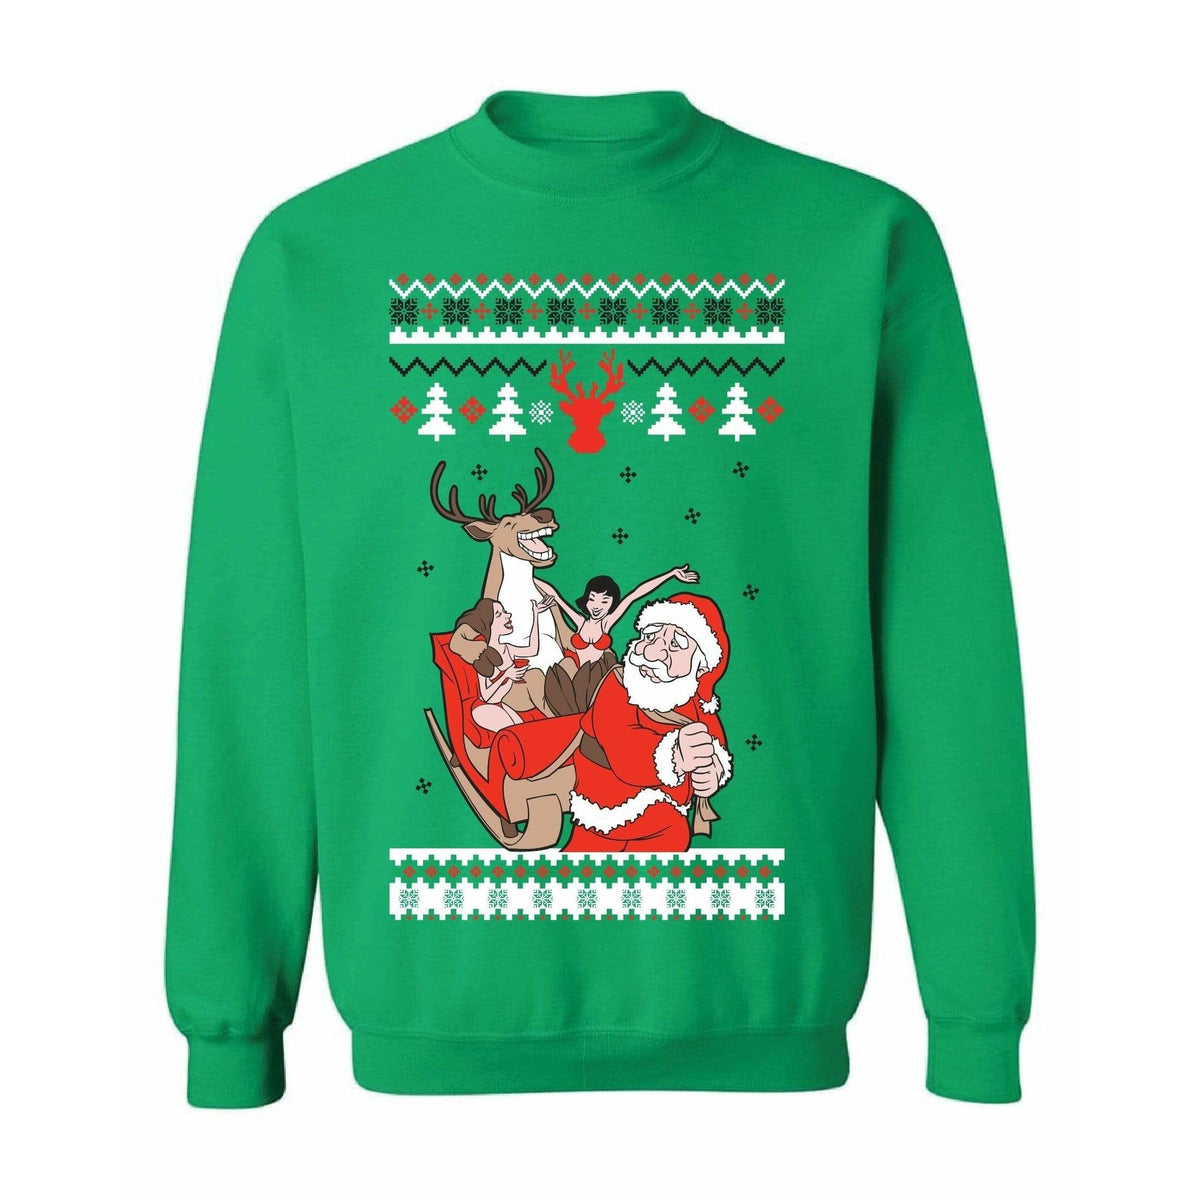 PARTY REINDEER - Green – Snowtorious